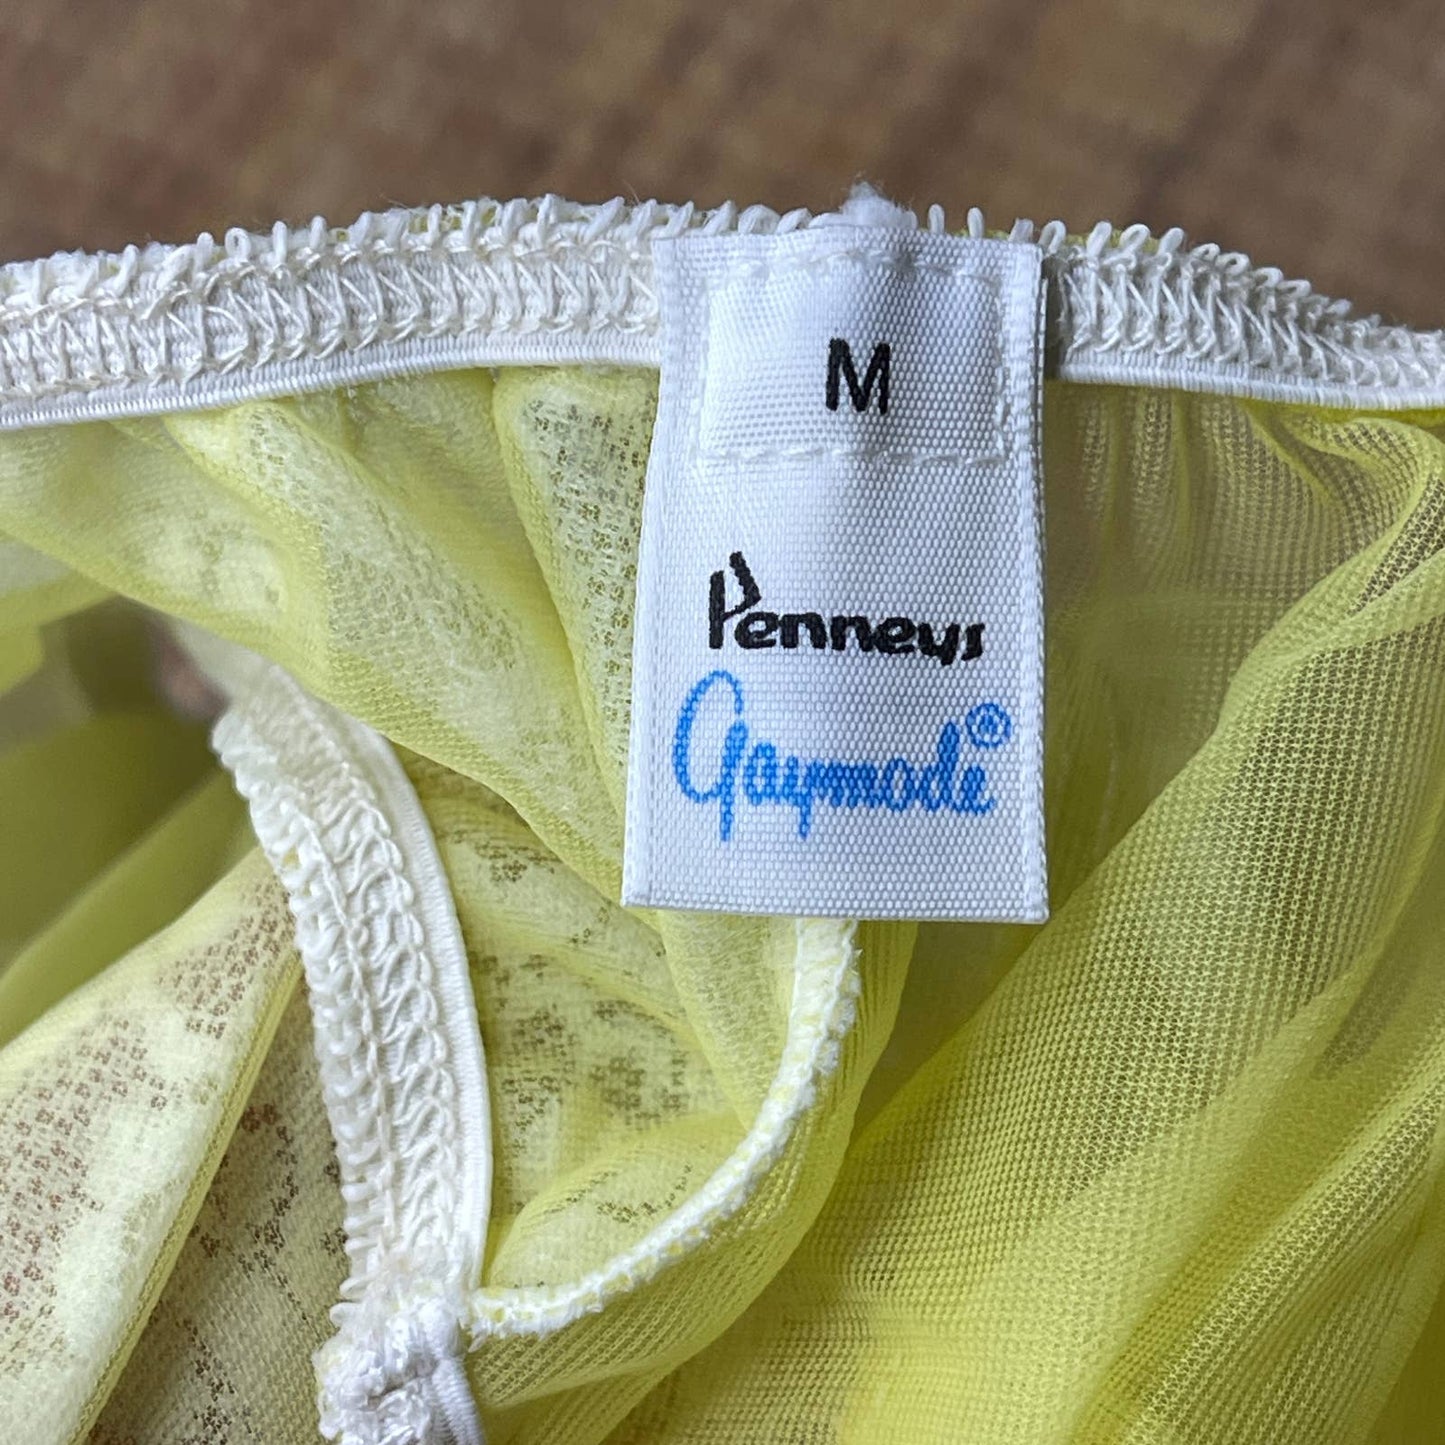 Vintage 60s Sheer Yellow Panties with White Lace Panel Front by Gaymode Size M